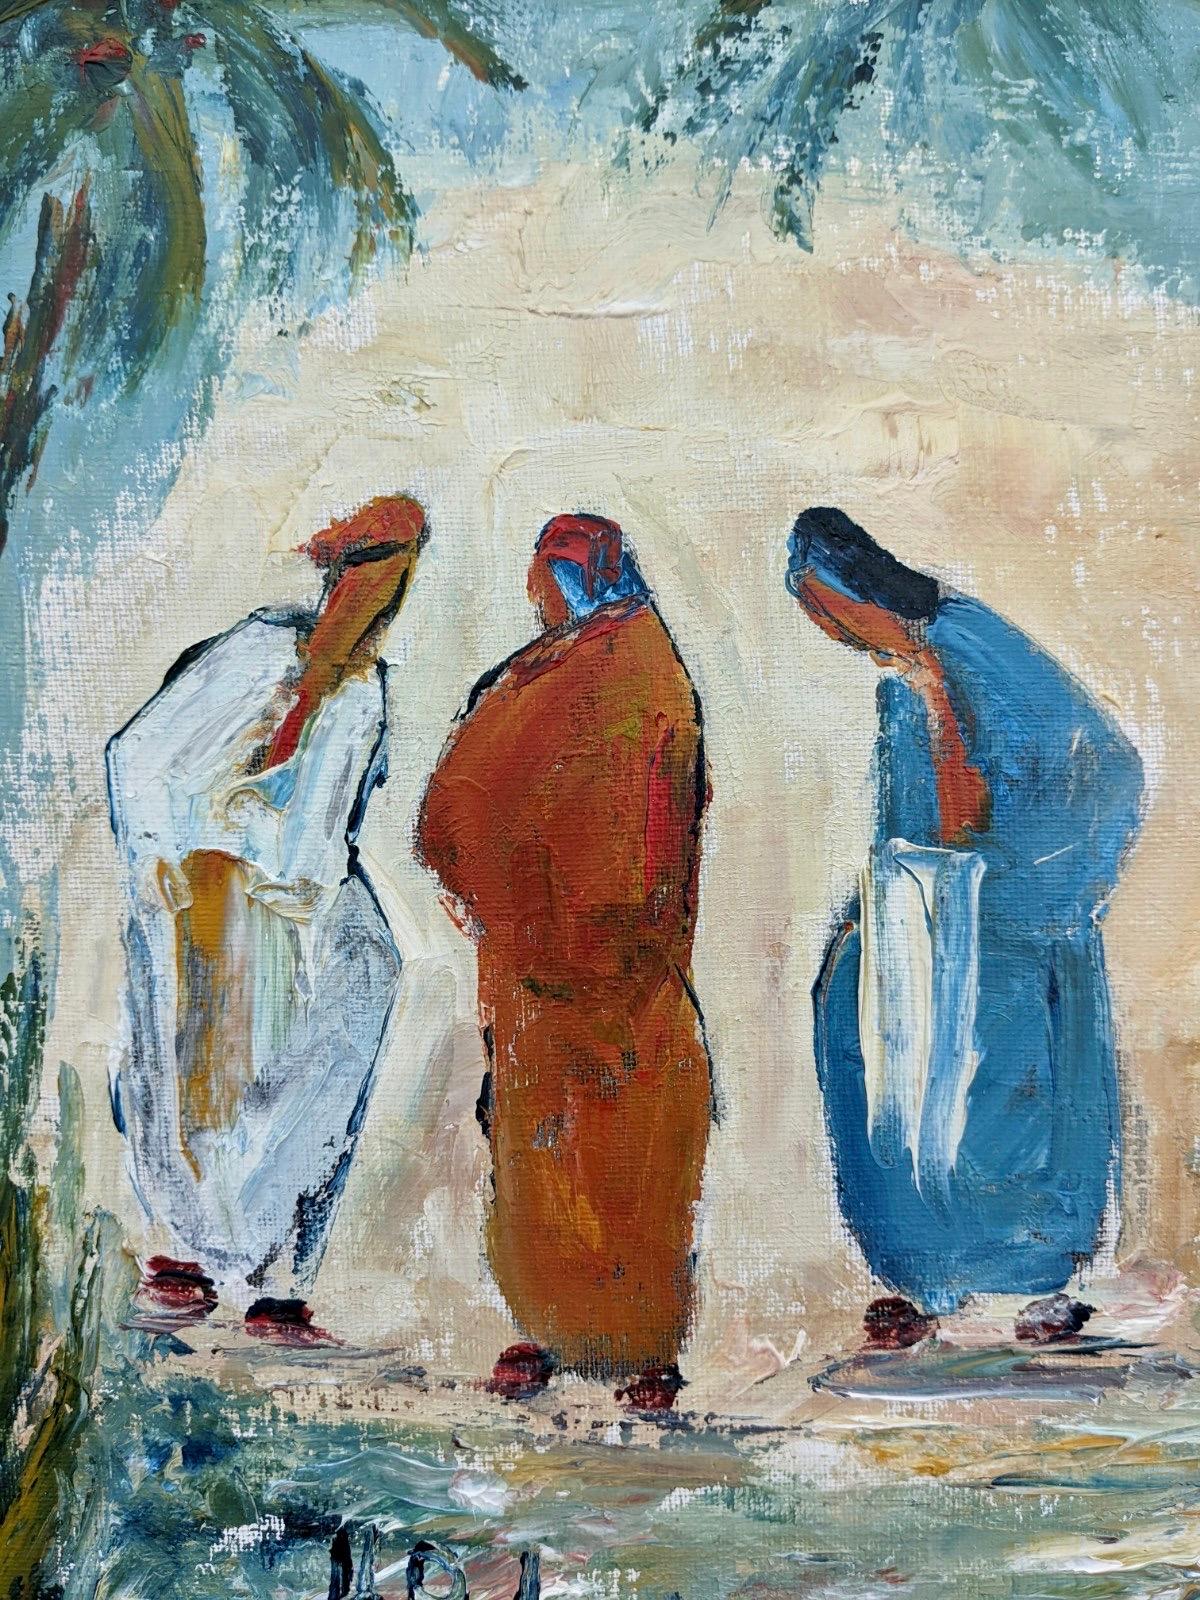 EVENING GATHERING
Size: 43 x 73 cm (including frame)
Oil on canvas

A vibrant and striking mid century oil painting depicting a group of bedouins gathering together and surrounded by lush greenery.

Painted in an expressionist manner, the artist has